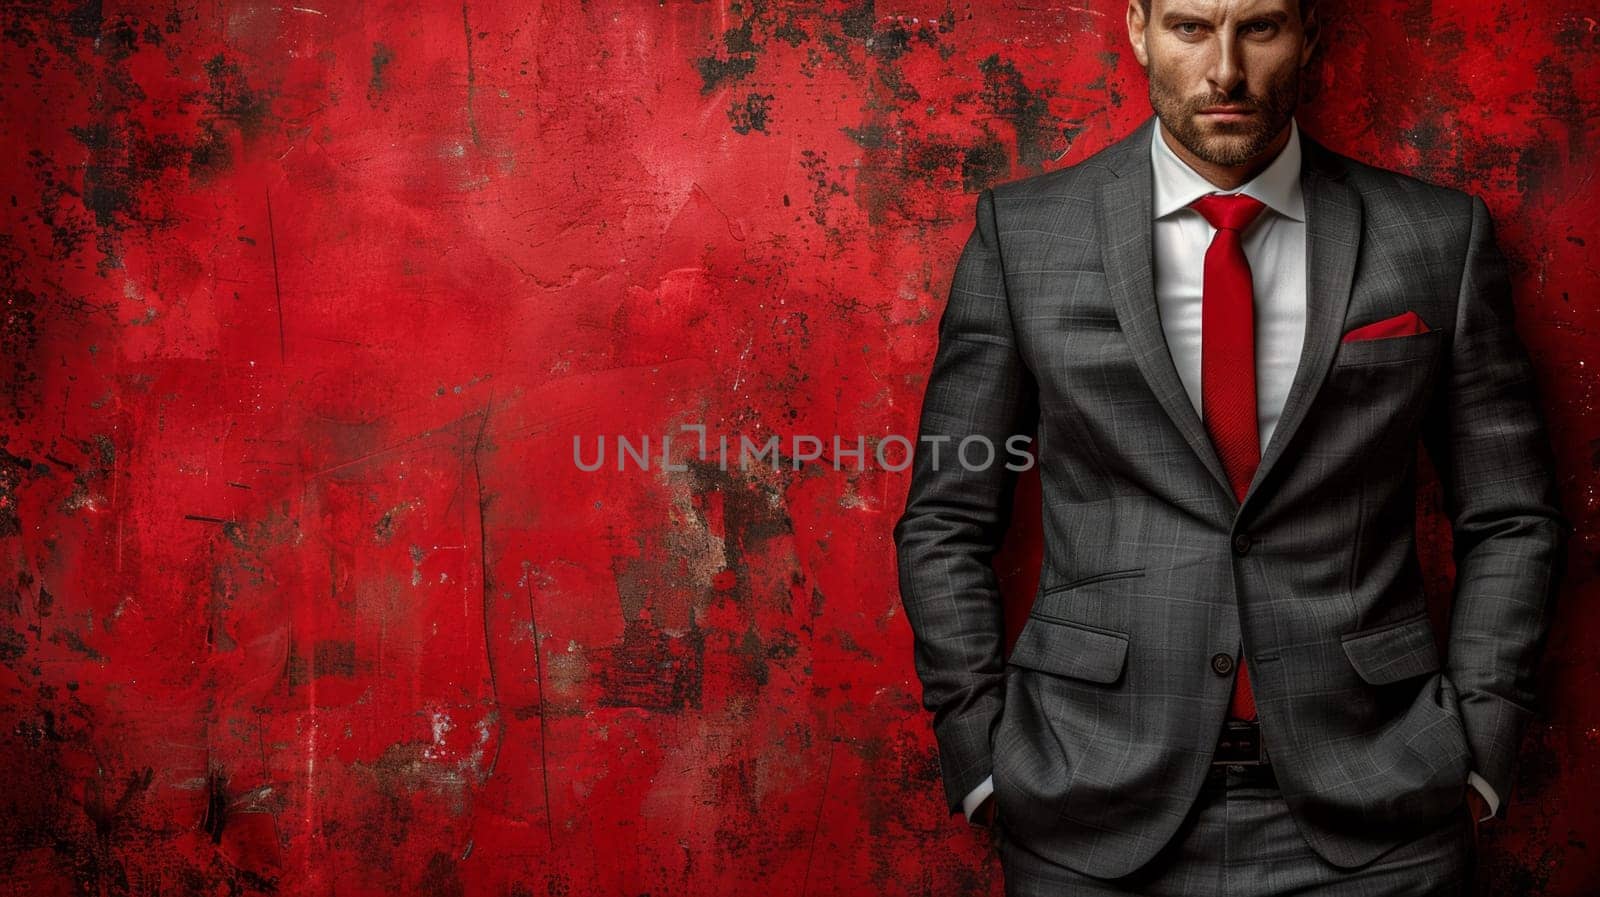 A man in a suit and tie standing against red wall